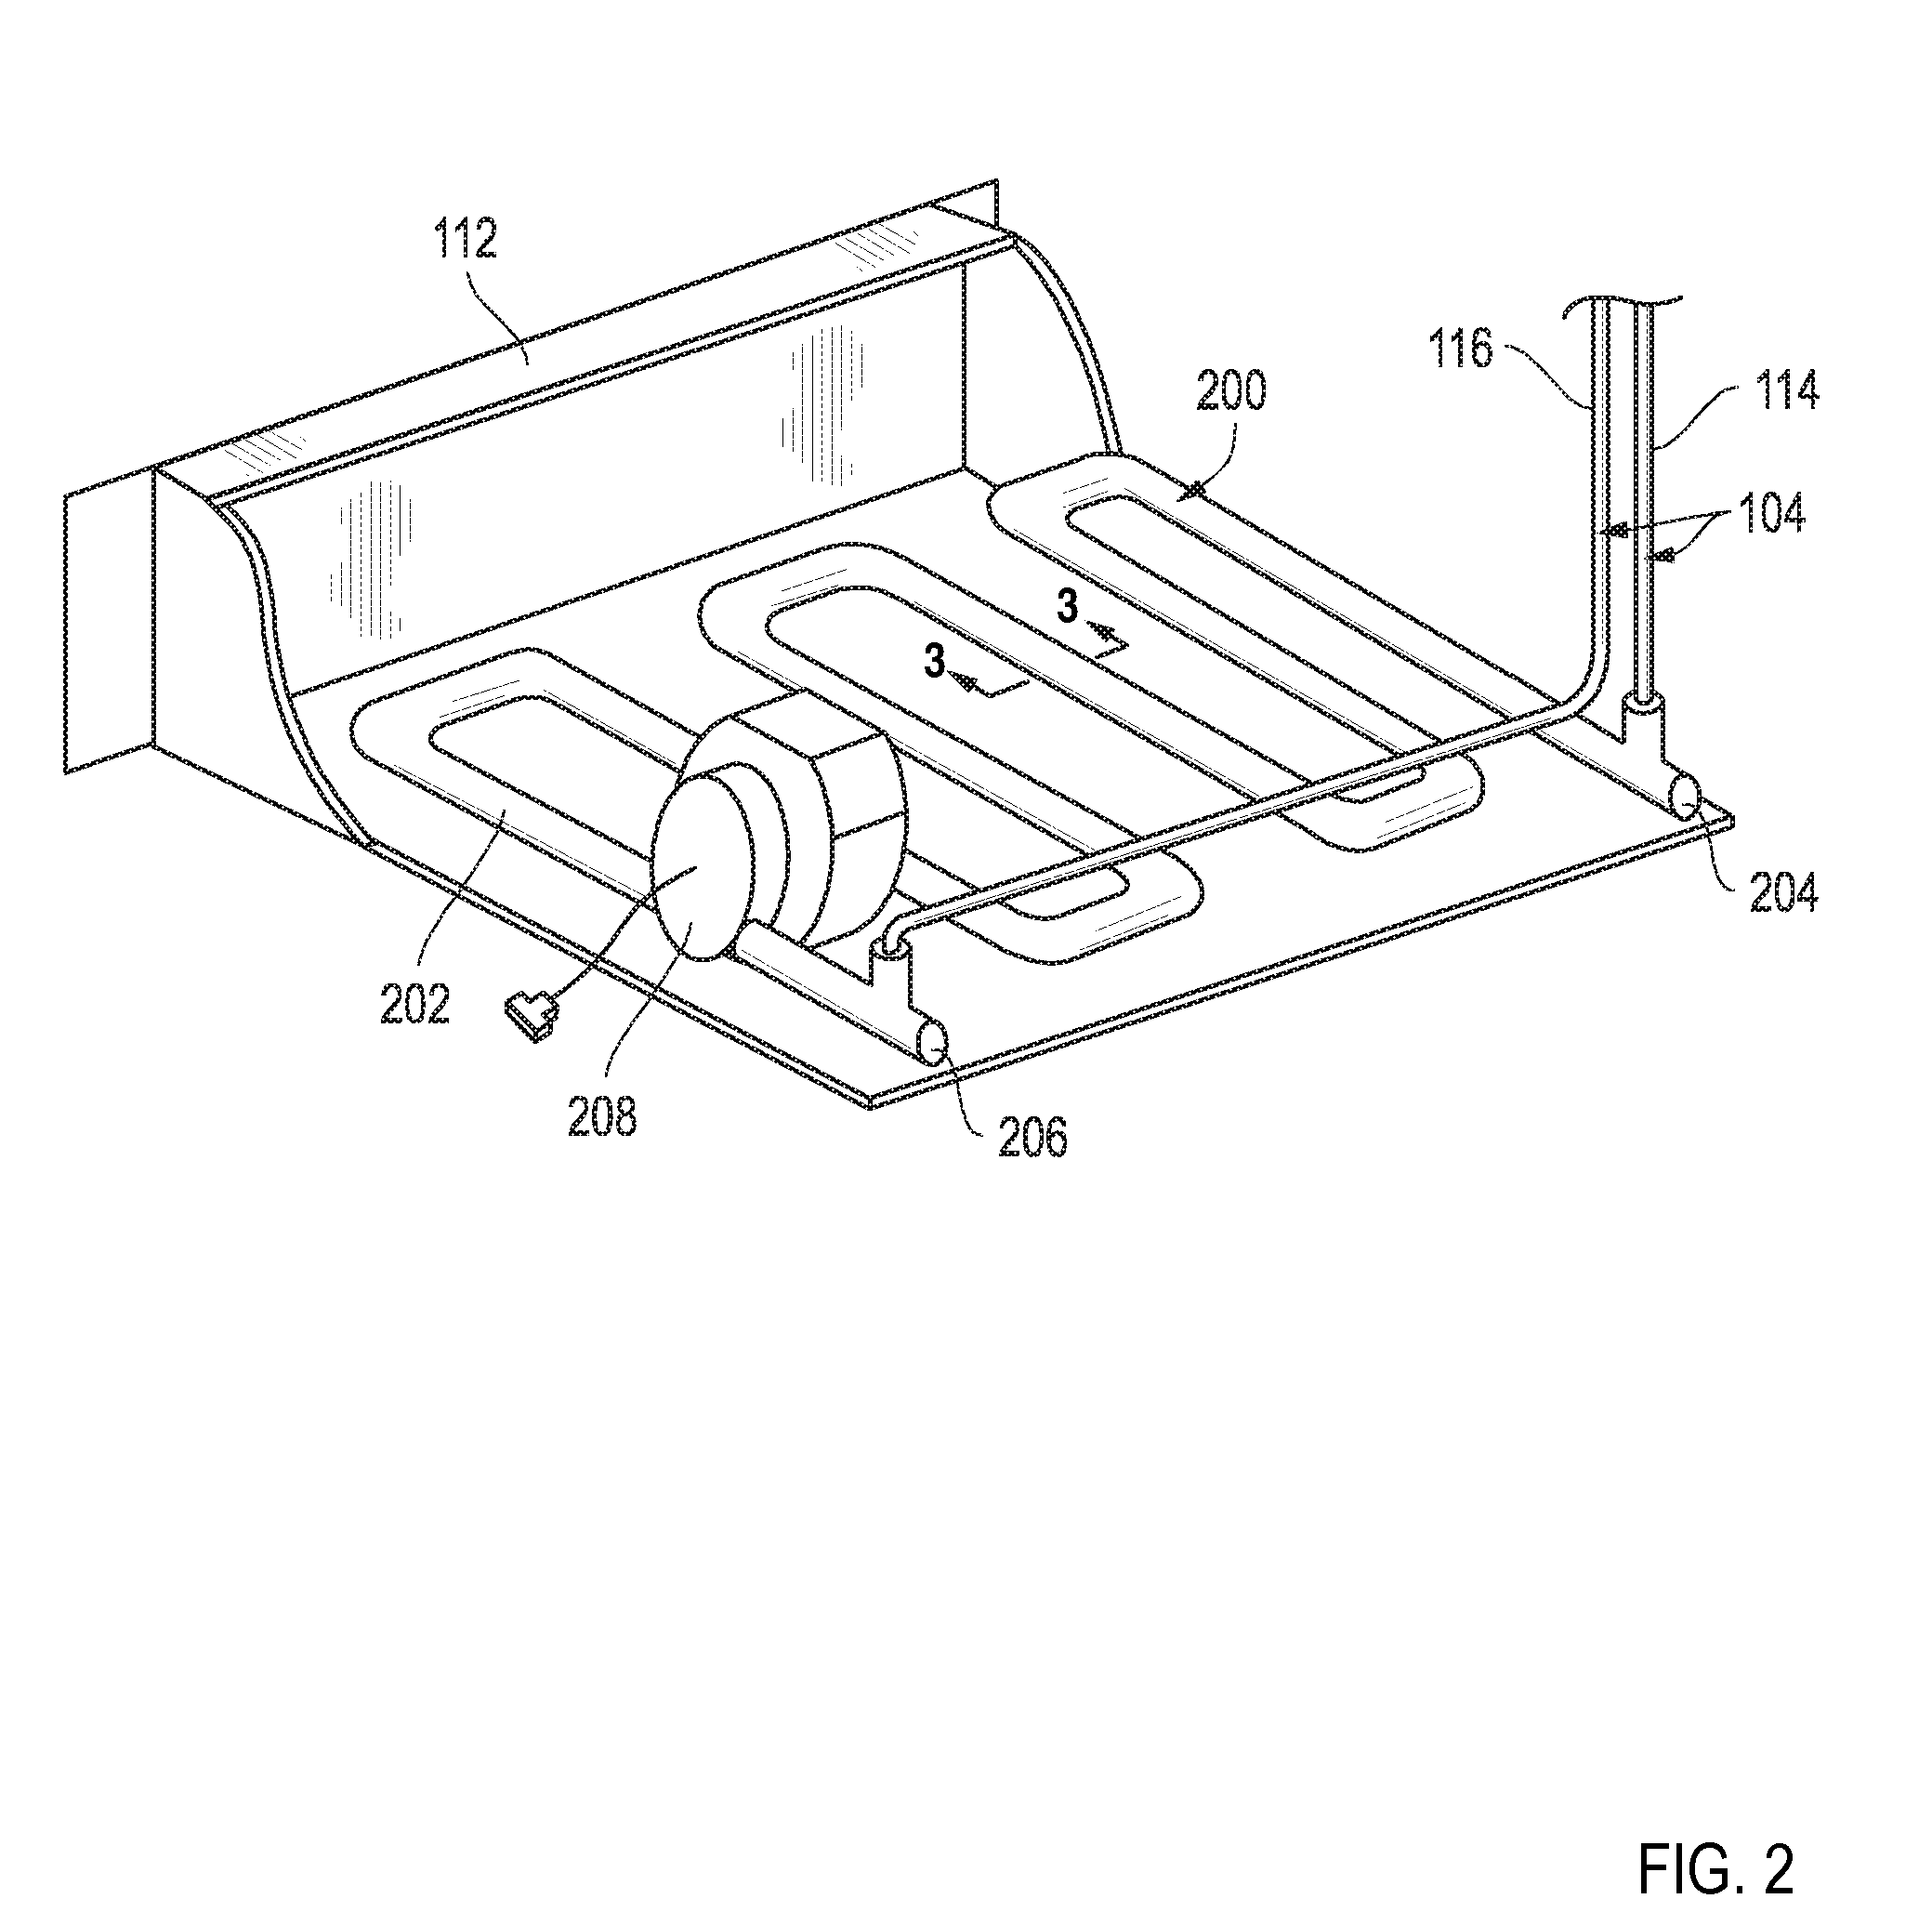 Heat Transfer Systems for Dissipating Thermal Loads From a Computer Rack